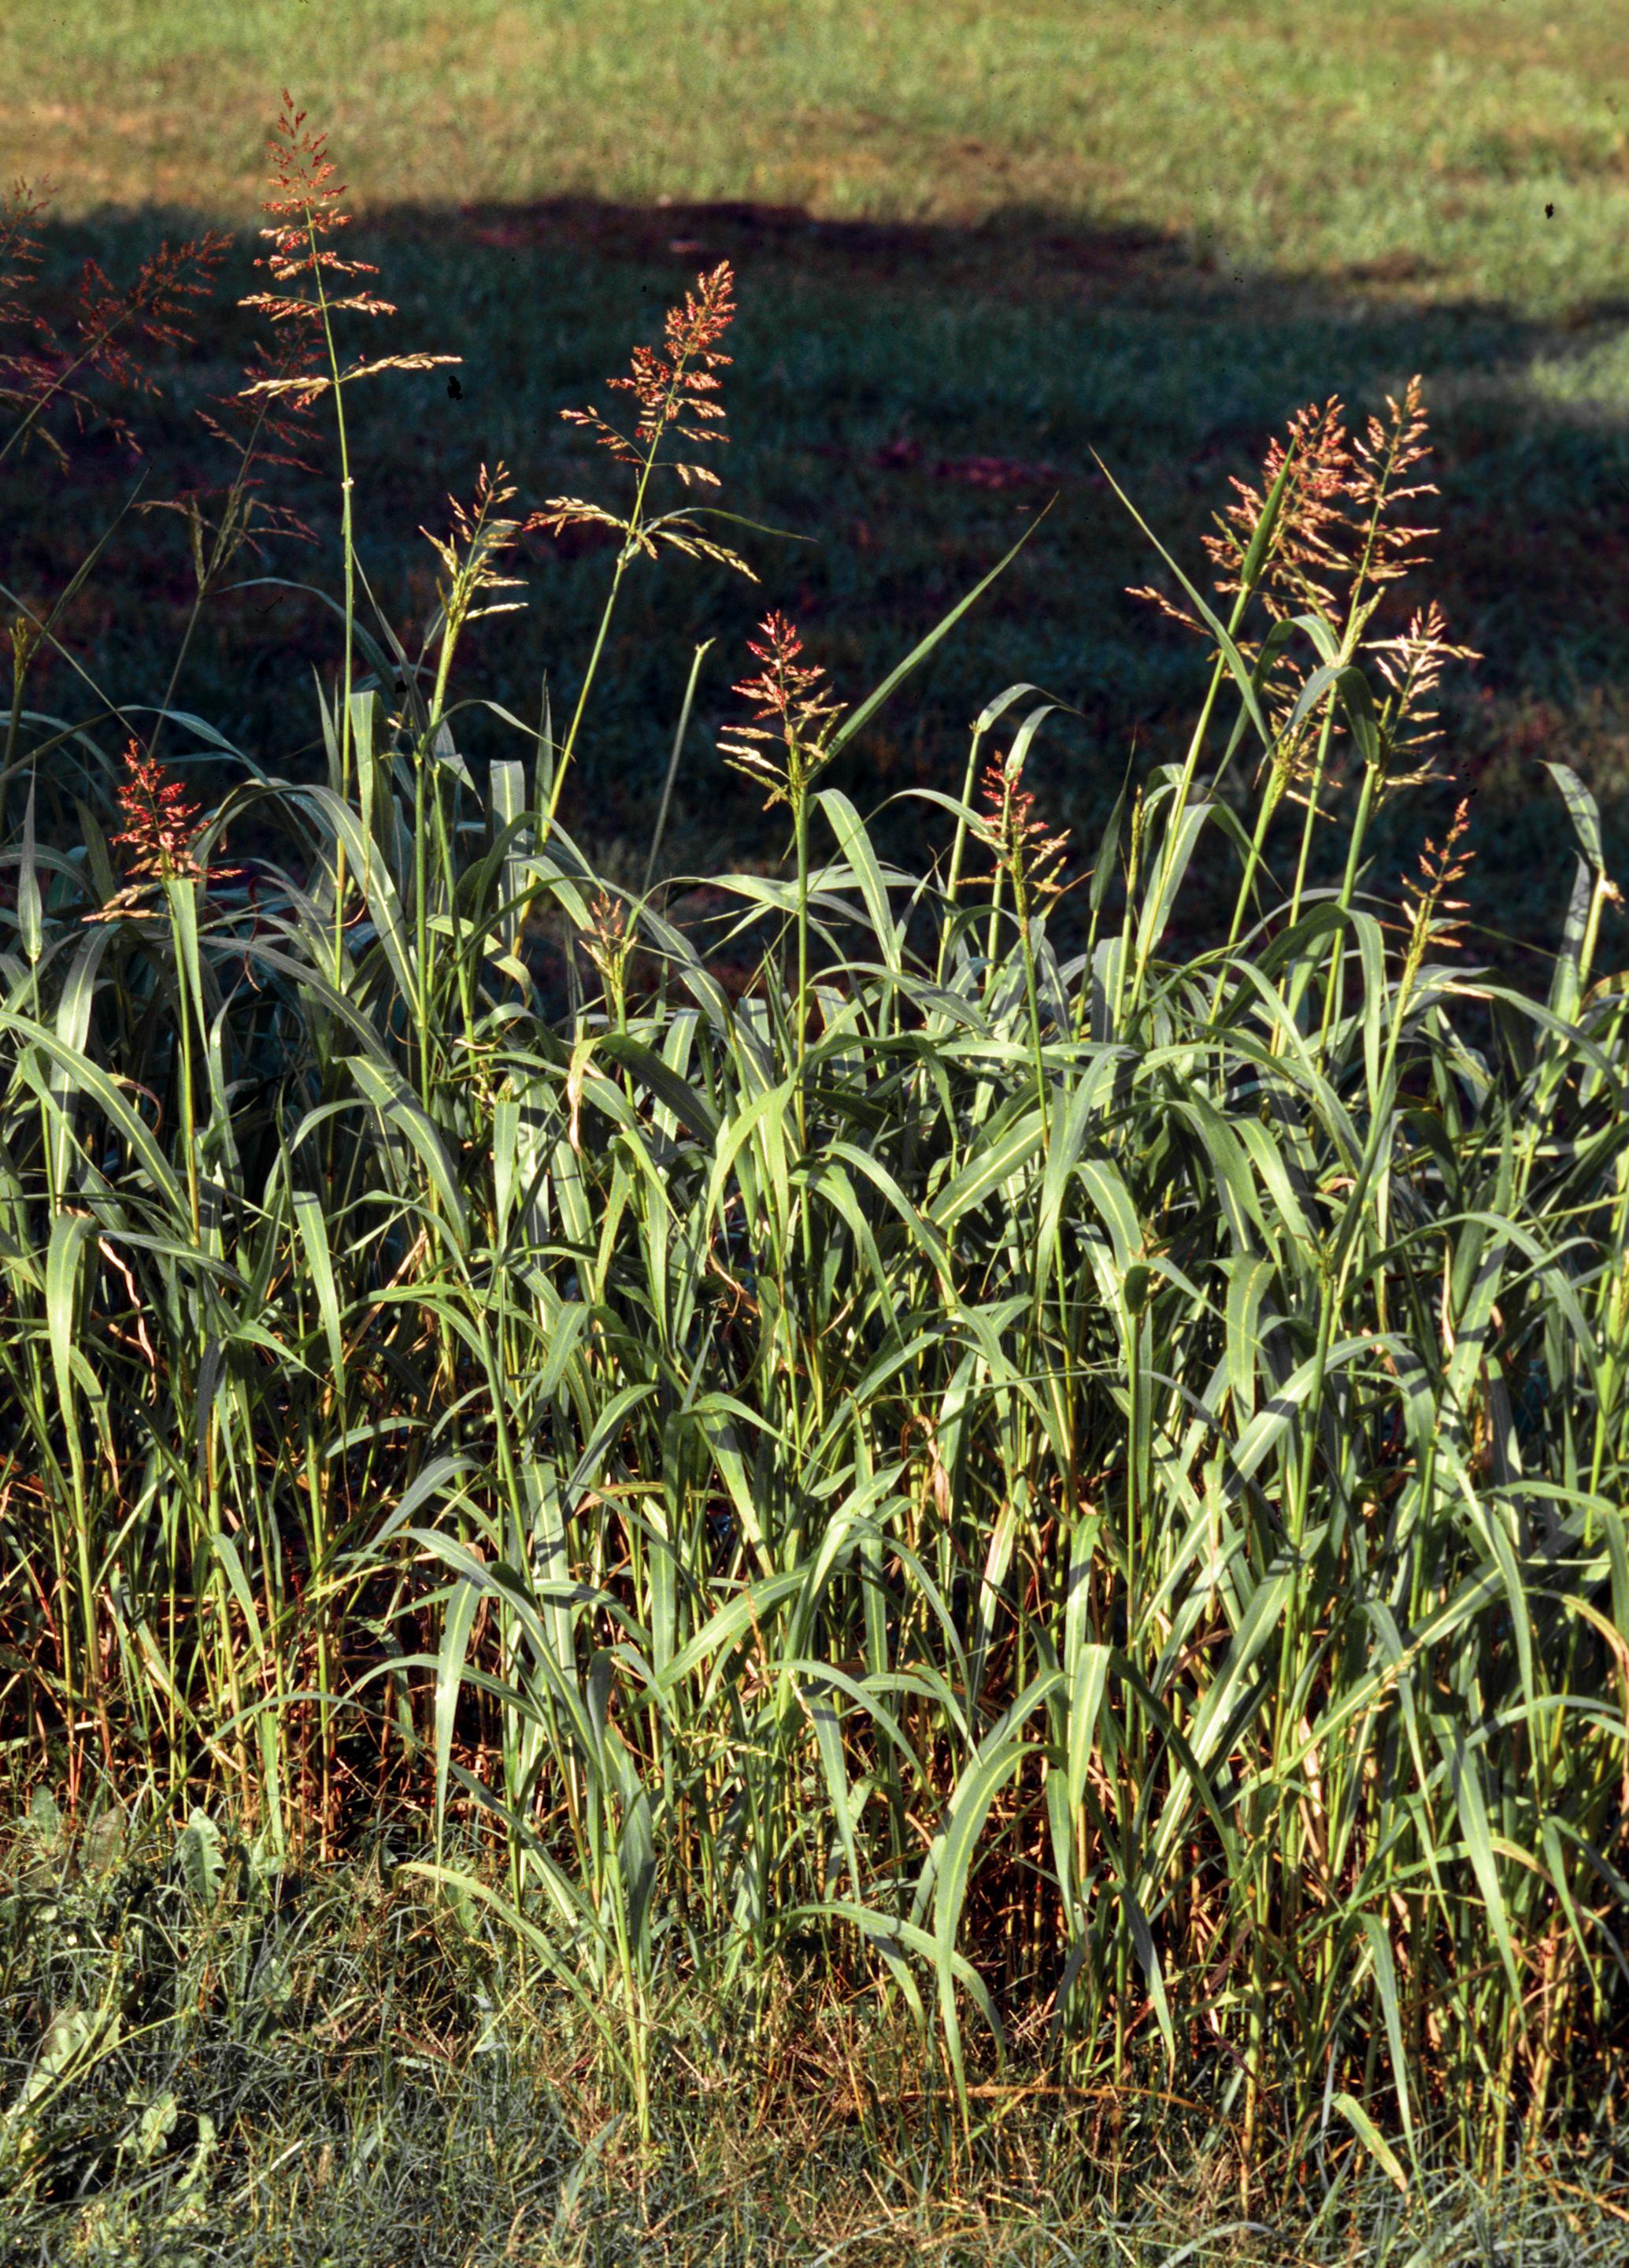 Johnsongrass growth habit (Miller and Bodner, Southern Weed Science Society, Bugwood.org)